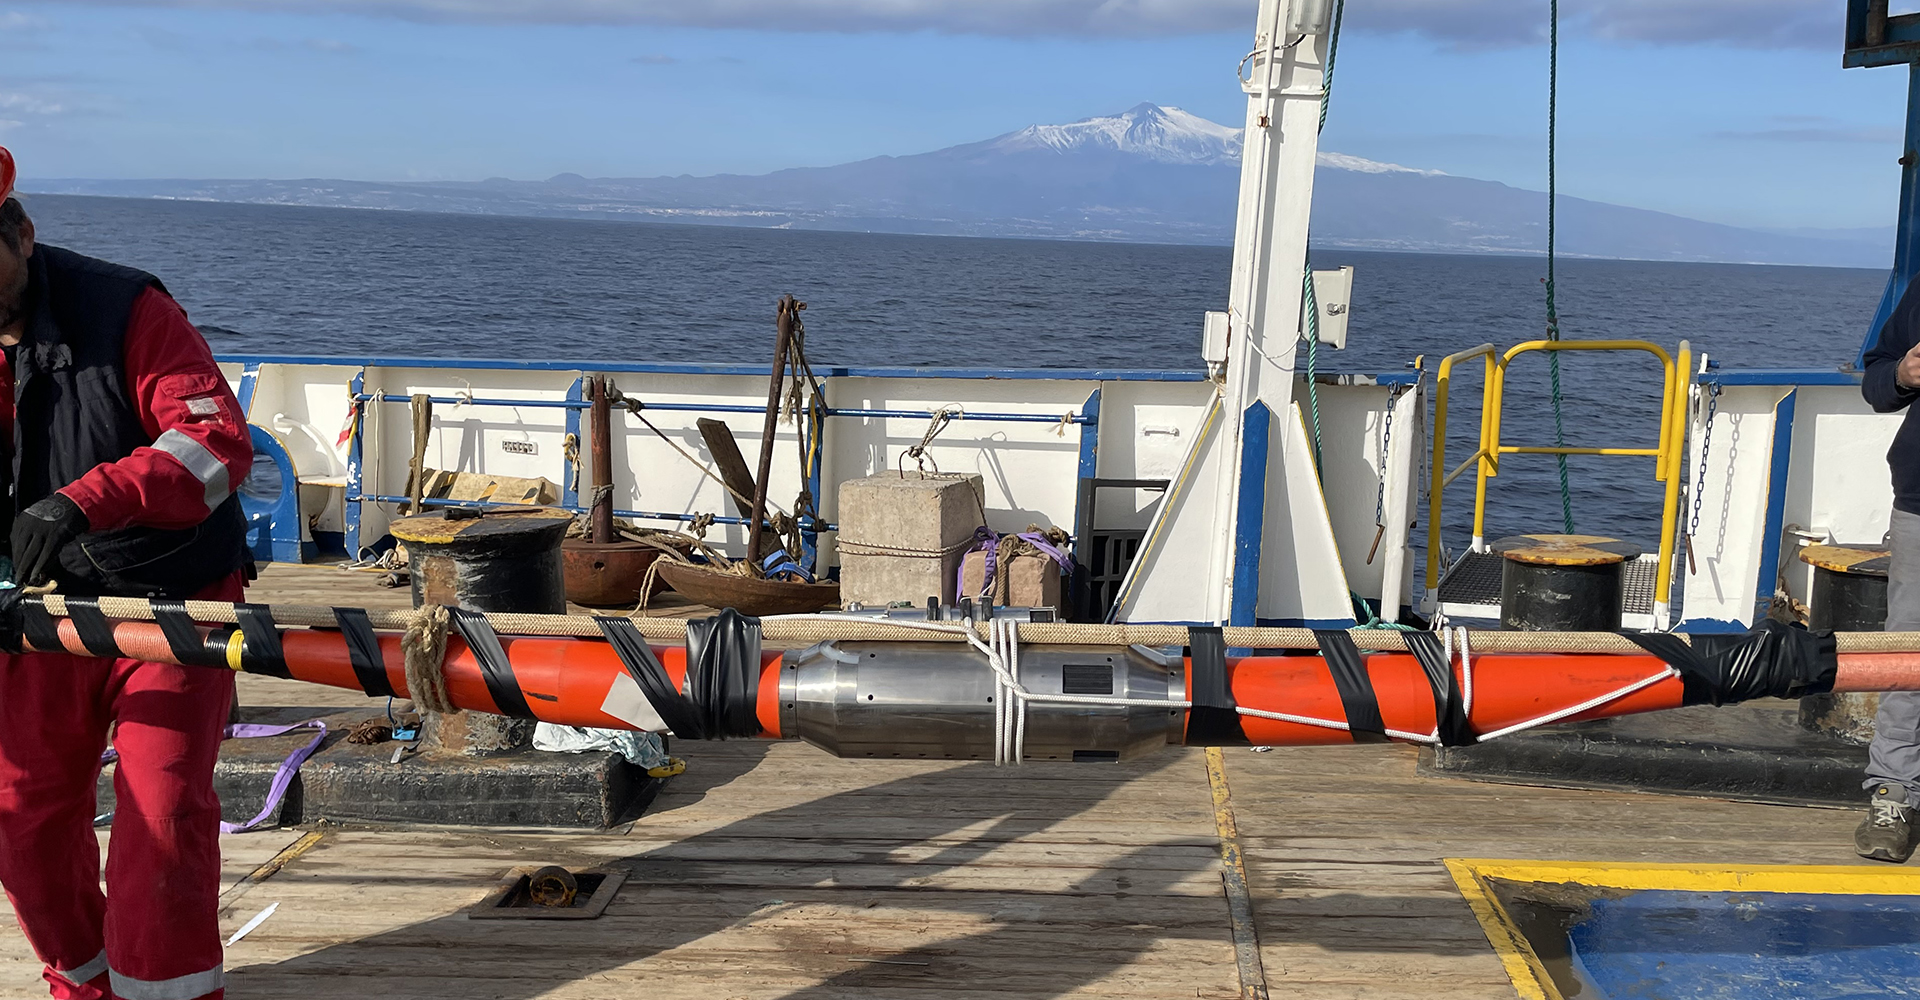 Instrument pod being deployed from a ship with Mount Etna in background